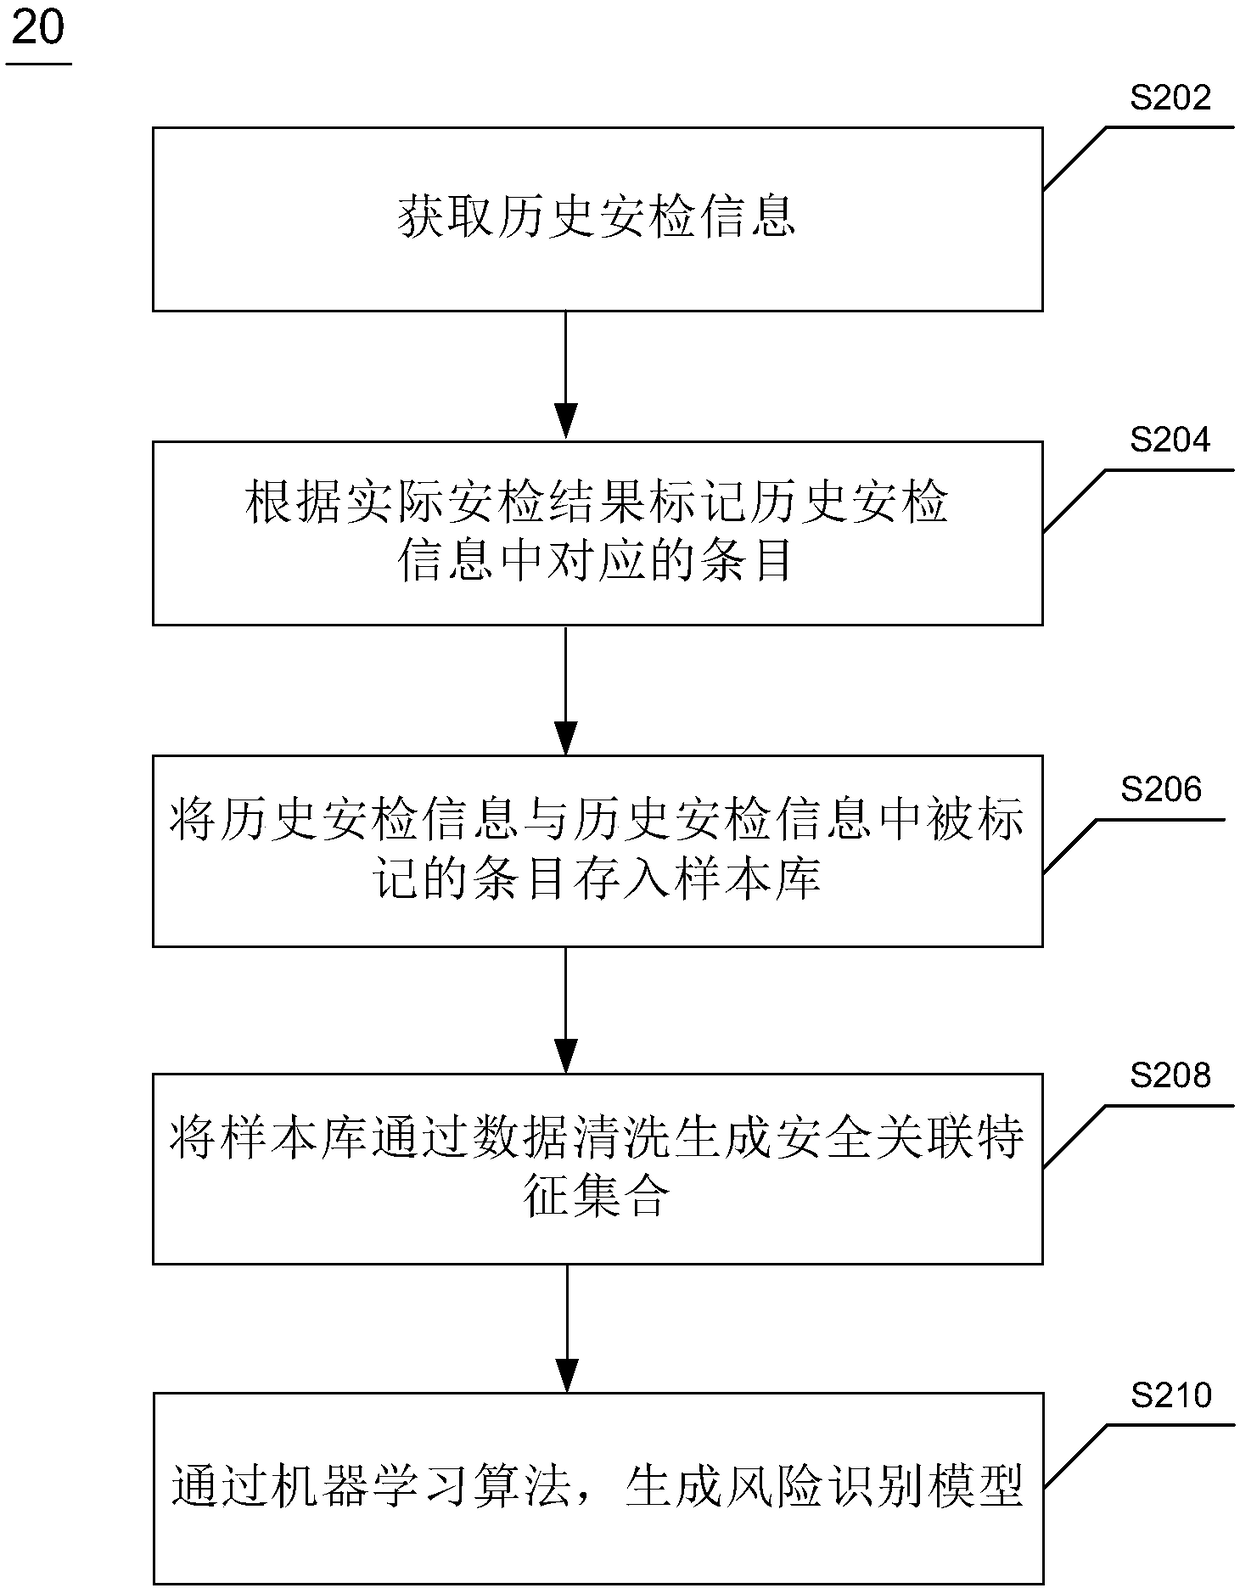 Method and device for grading checked person in security check